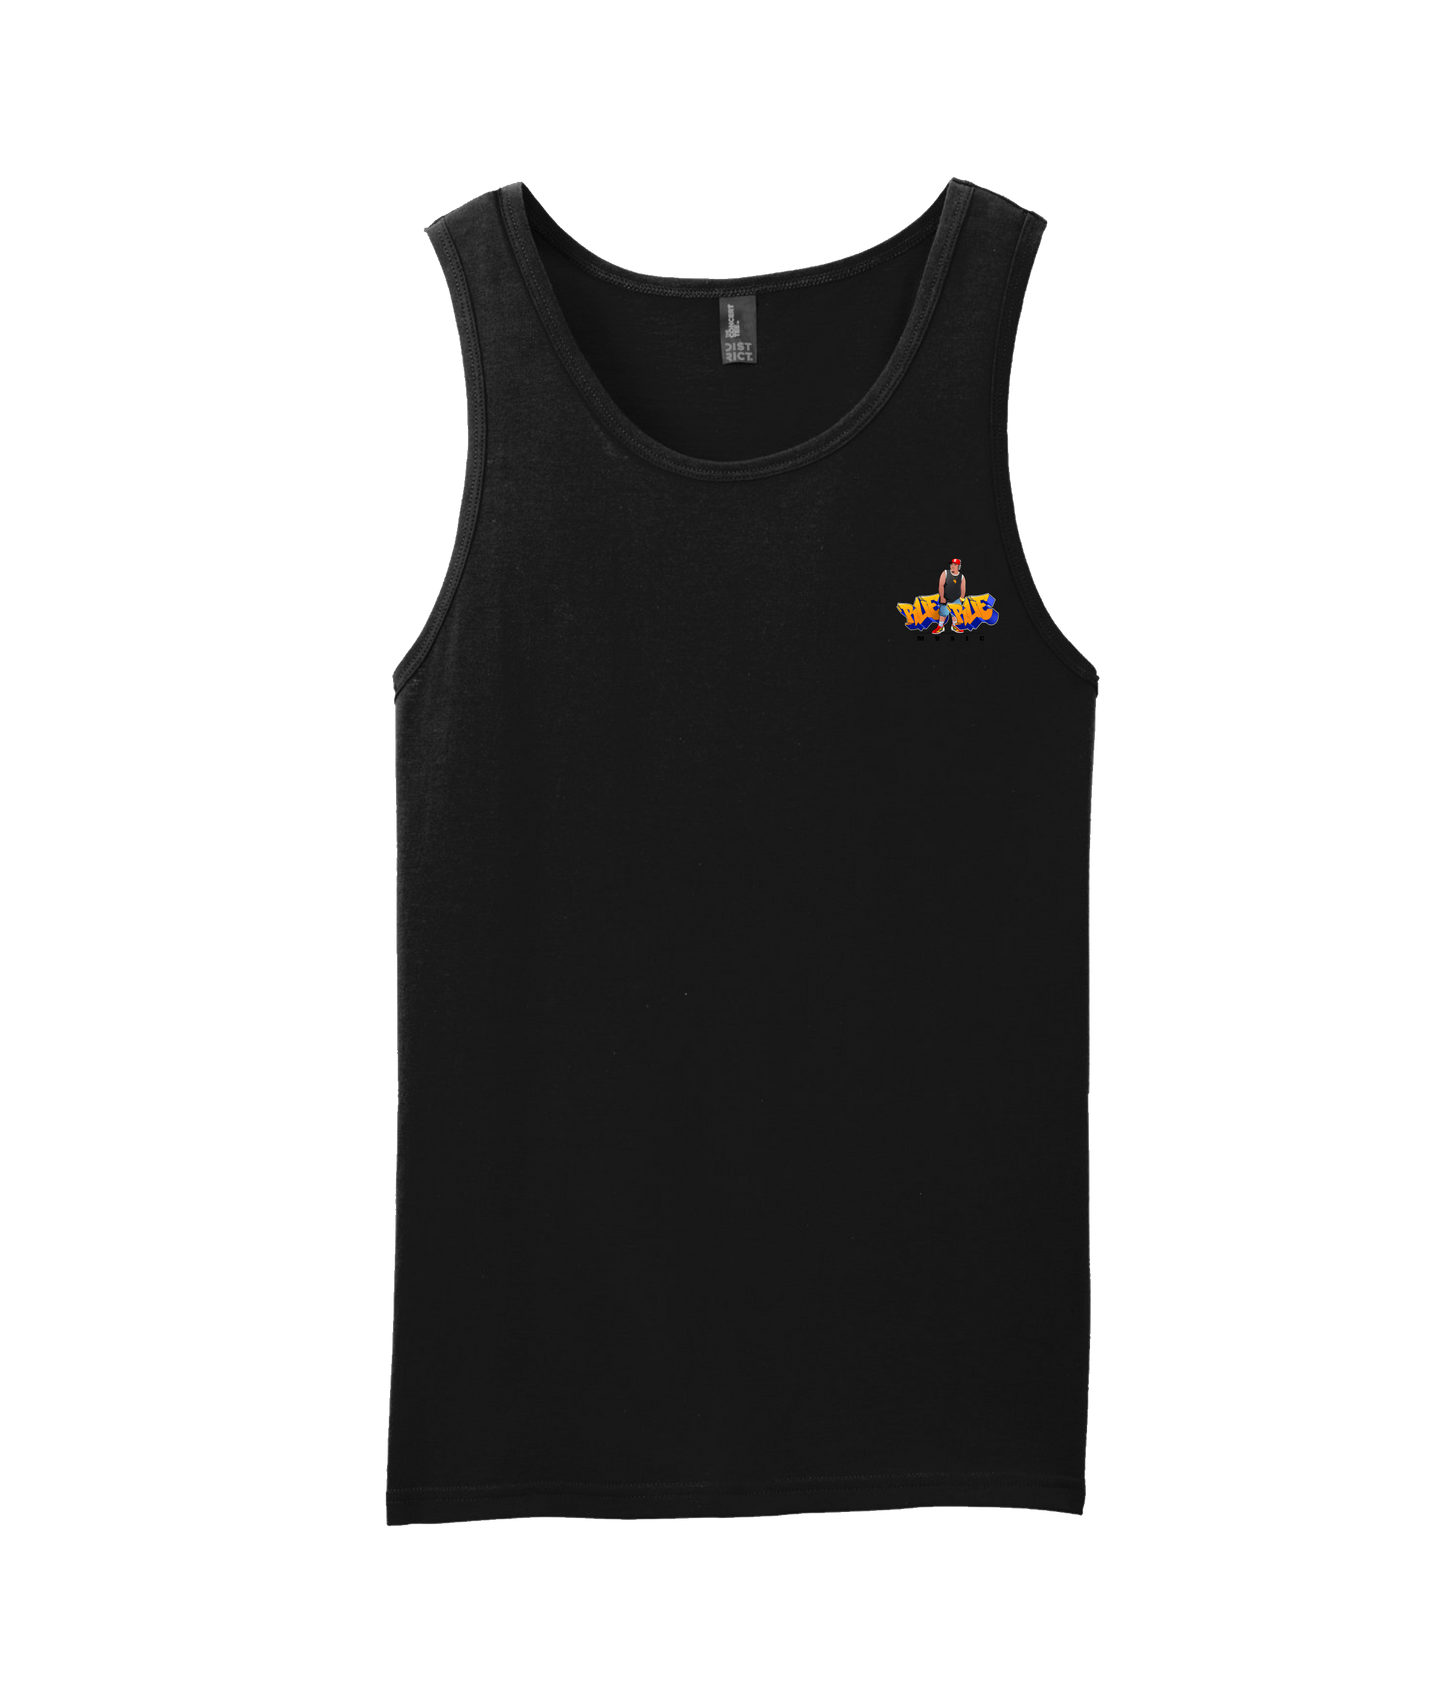 Dynamic Cert Music Collective - RUE - Black Tank Top